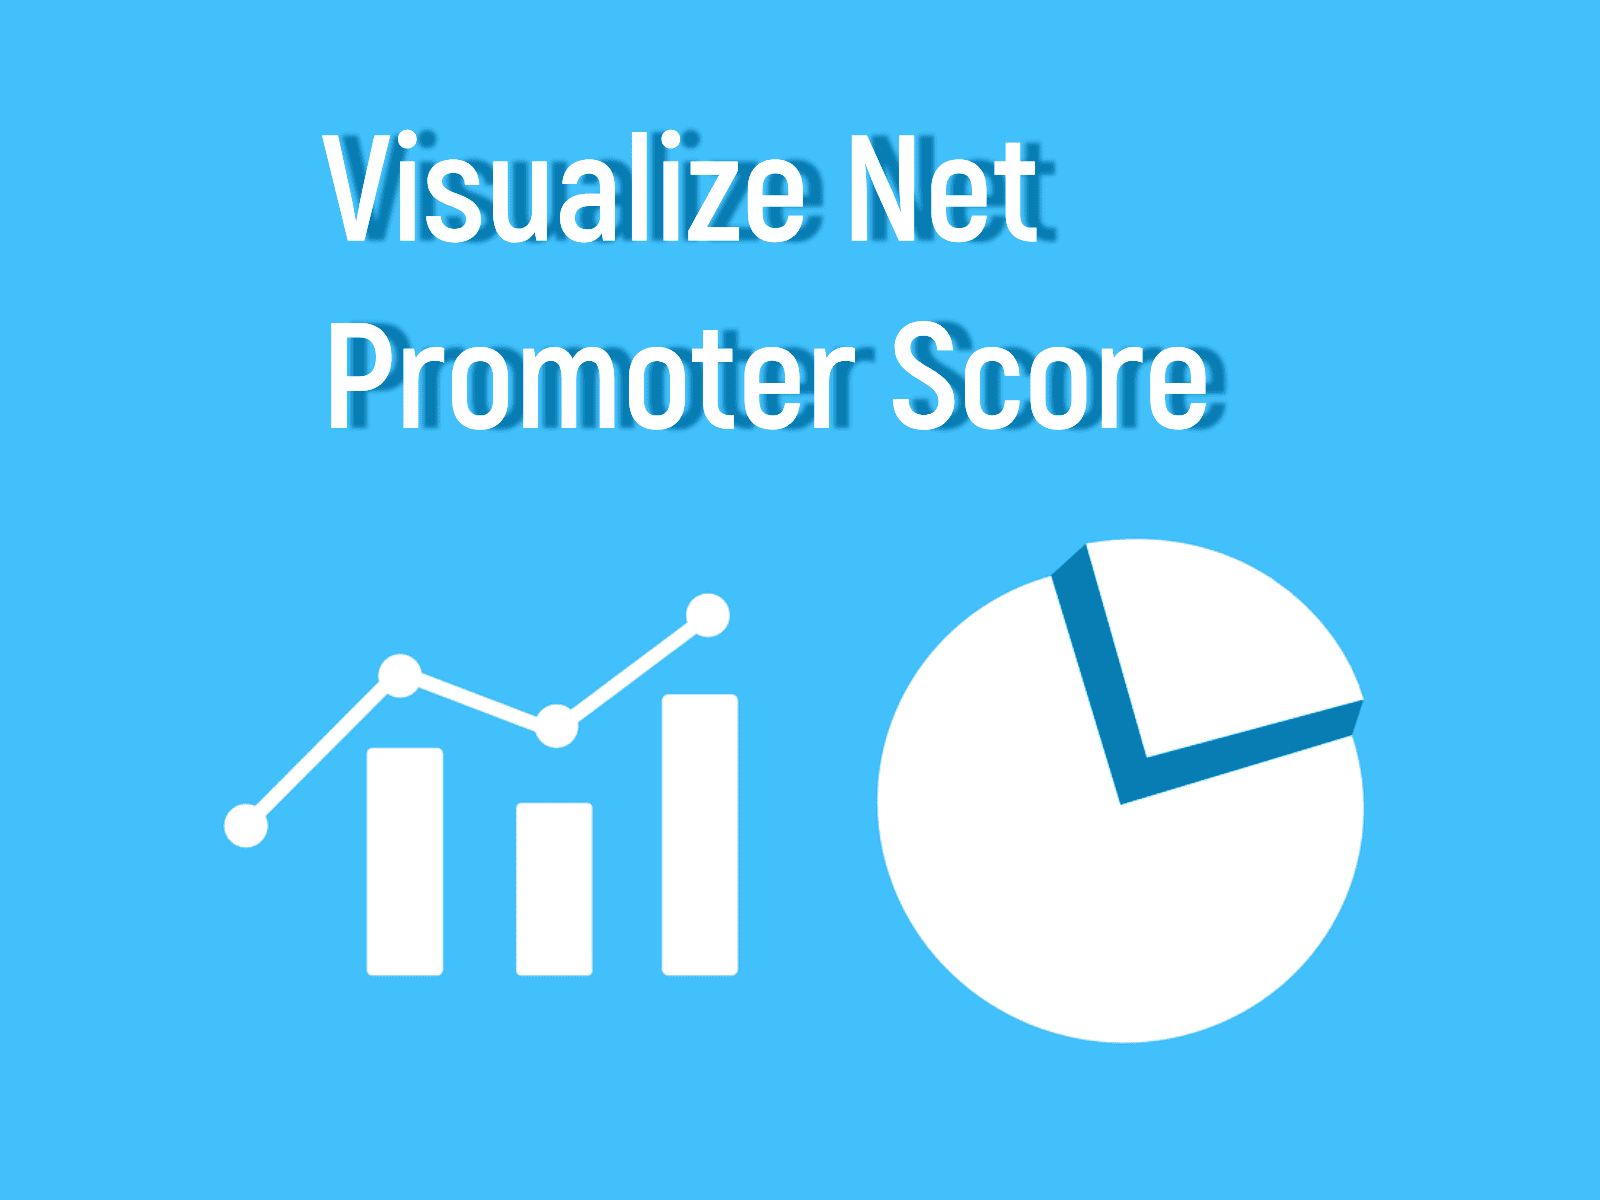 Top 5 Ways to Visualize Net Promoter Score